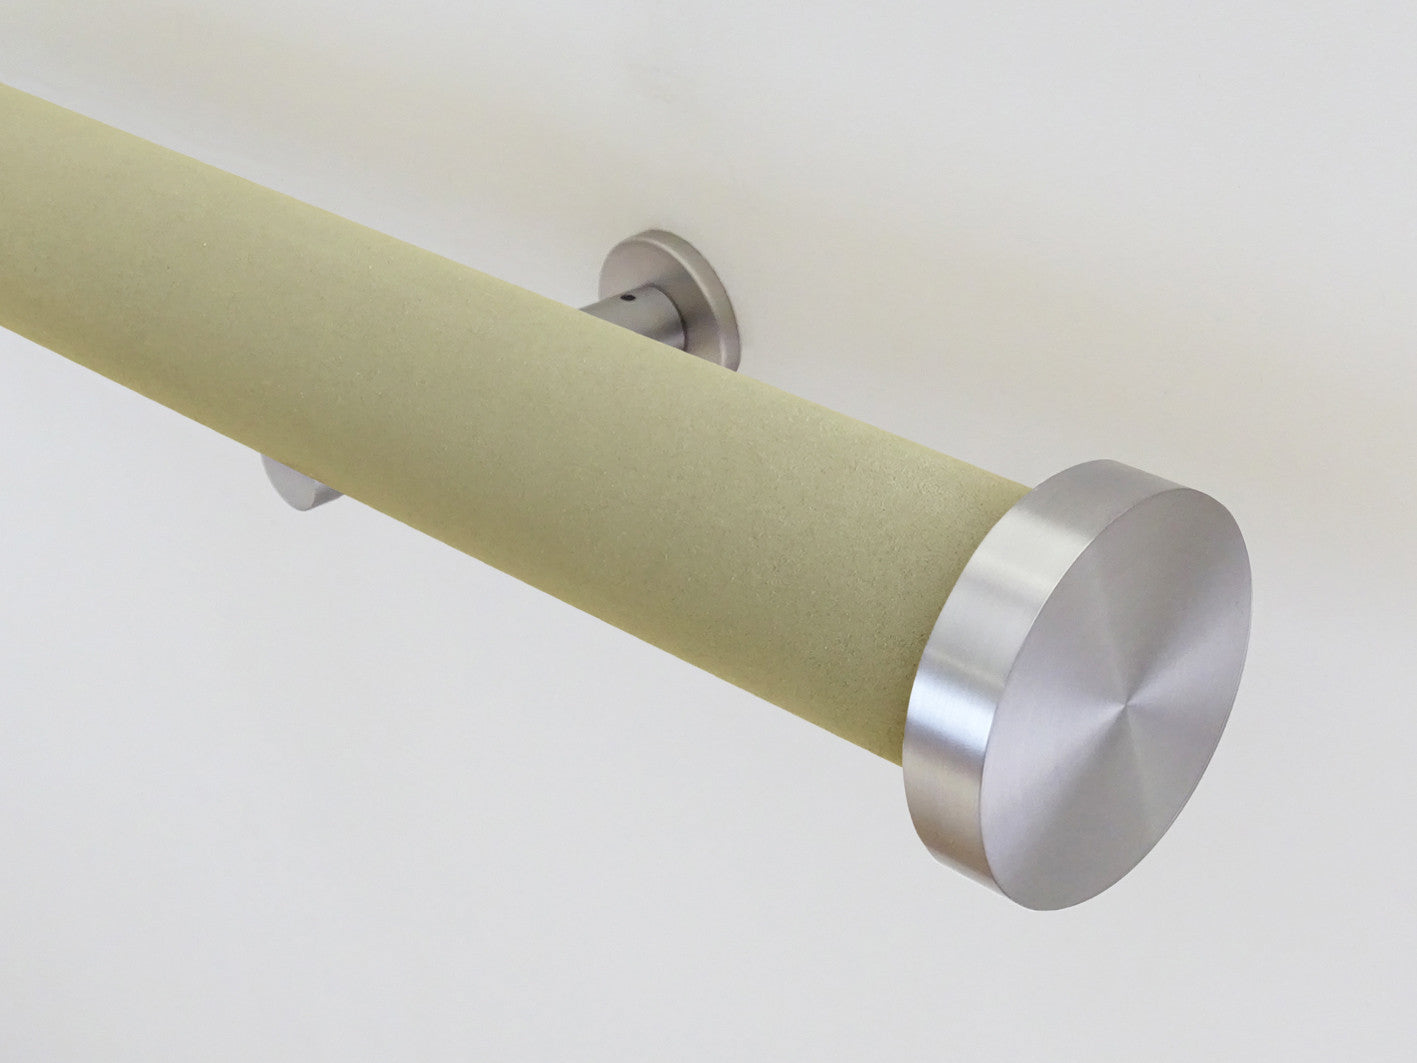 Faux Suede "New Acorn" 50mm tracked curtain pole by Walcot House